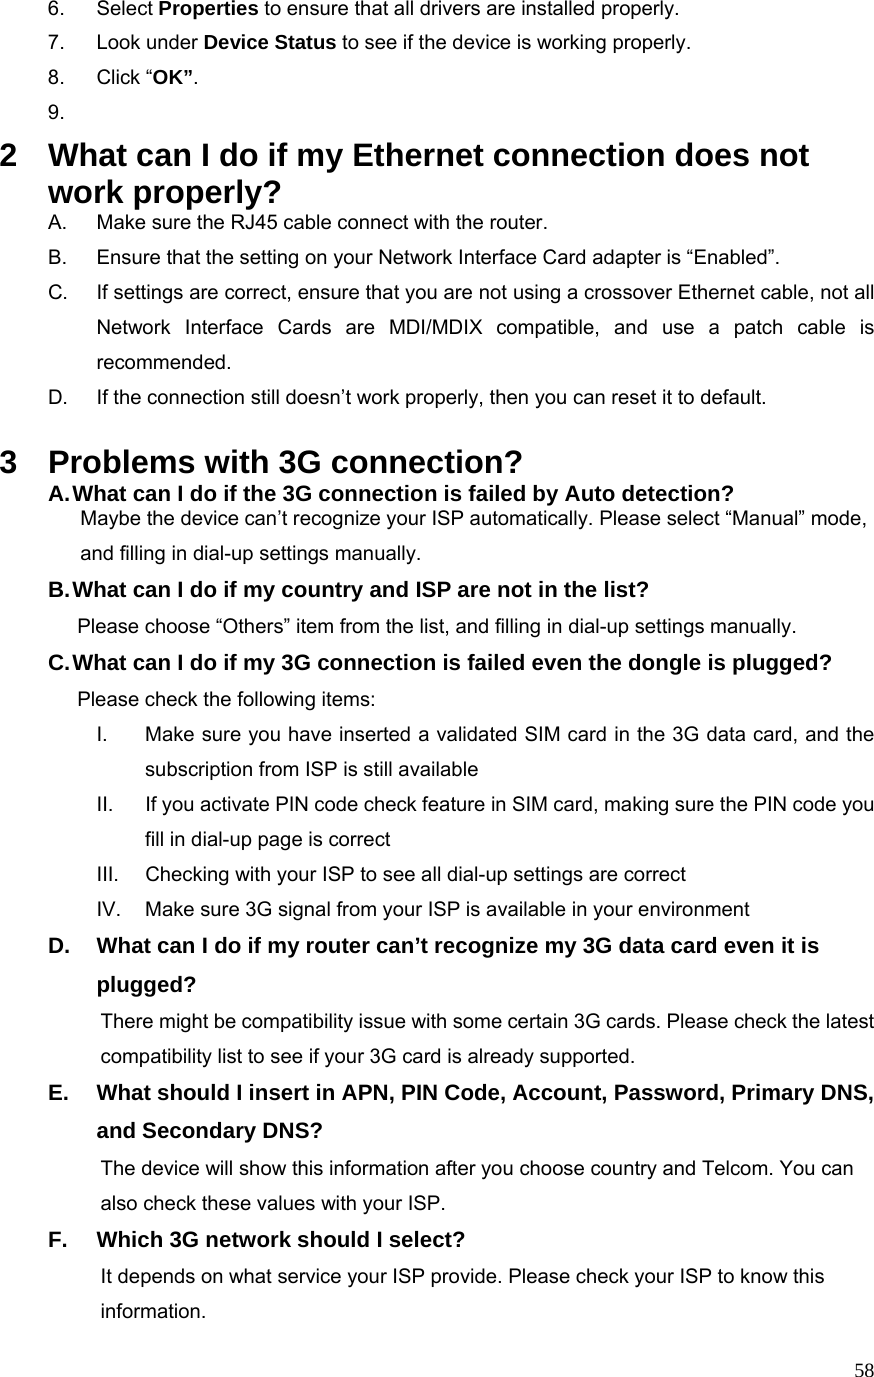  586. Select Properties to ensure that all drivers are installed properly. 7. Look under Device Status to see if the device is working properly. 8. Click “OK”. 9.  2  What can I do if my Ethernet connection does not work properly? A.  Make sure the RJ45 cable connect with the router. B.  Ensure that the setting on your Network Interface Card adapter is “Enabled”. C.  If settings are correct, ensure that you are not using a crossover Ethernet cable, not all Network Interface Cards are MDI/MDIX compatible, and use a patch cable is recommended. D.  If the connection still doesn’t work properly, then you can reset it to default.      3  Problems with 3G connection? A. What can I do if the 3G connection is failed by Auto detection?           Maybe the device can’t recognize your ISP automatically. Please select “Manual” mode,     and filling in dial-up settings manually. B. What can I do if my country and ISP are not in the list?        Please choose “Others” item from the list, and filling in dial-up settings manually. C. What can I do if my 3G connection is failed even the dongle is plugged?        Please check the following items: I.  Make sure you have inserted a validated SIM card in the 3G data card, and the subscription from ISP is still available II.  If you activate PIN code check feature in SIM card, making sure the PIN code you fill in dial-up page is correct III.  Checking with your ISP to see all dial-up settings are correct IV.  Make sure 3G signal from your ISP is available in your environment D.  What can I do if my router can’t recognize my 3G data card even it is plugged?           There might be compatibility issue with some certain 3G cards. Please check the latest     compatibility list to see if your 3G card is already supported. E.  What should I insert in APN, PIN Code, Account, Password, Primary DNS, and Secondary DNS?                     The device will show this information after you choose country and Telcom. You can       also check these values with your ISP. F.  Which 3G network should I select?                     It depends on what service your ISP provide. Please check your ISP to know this information. 